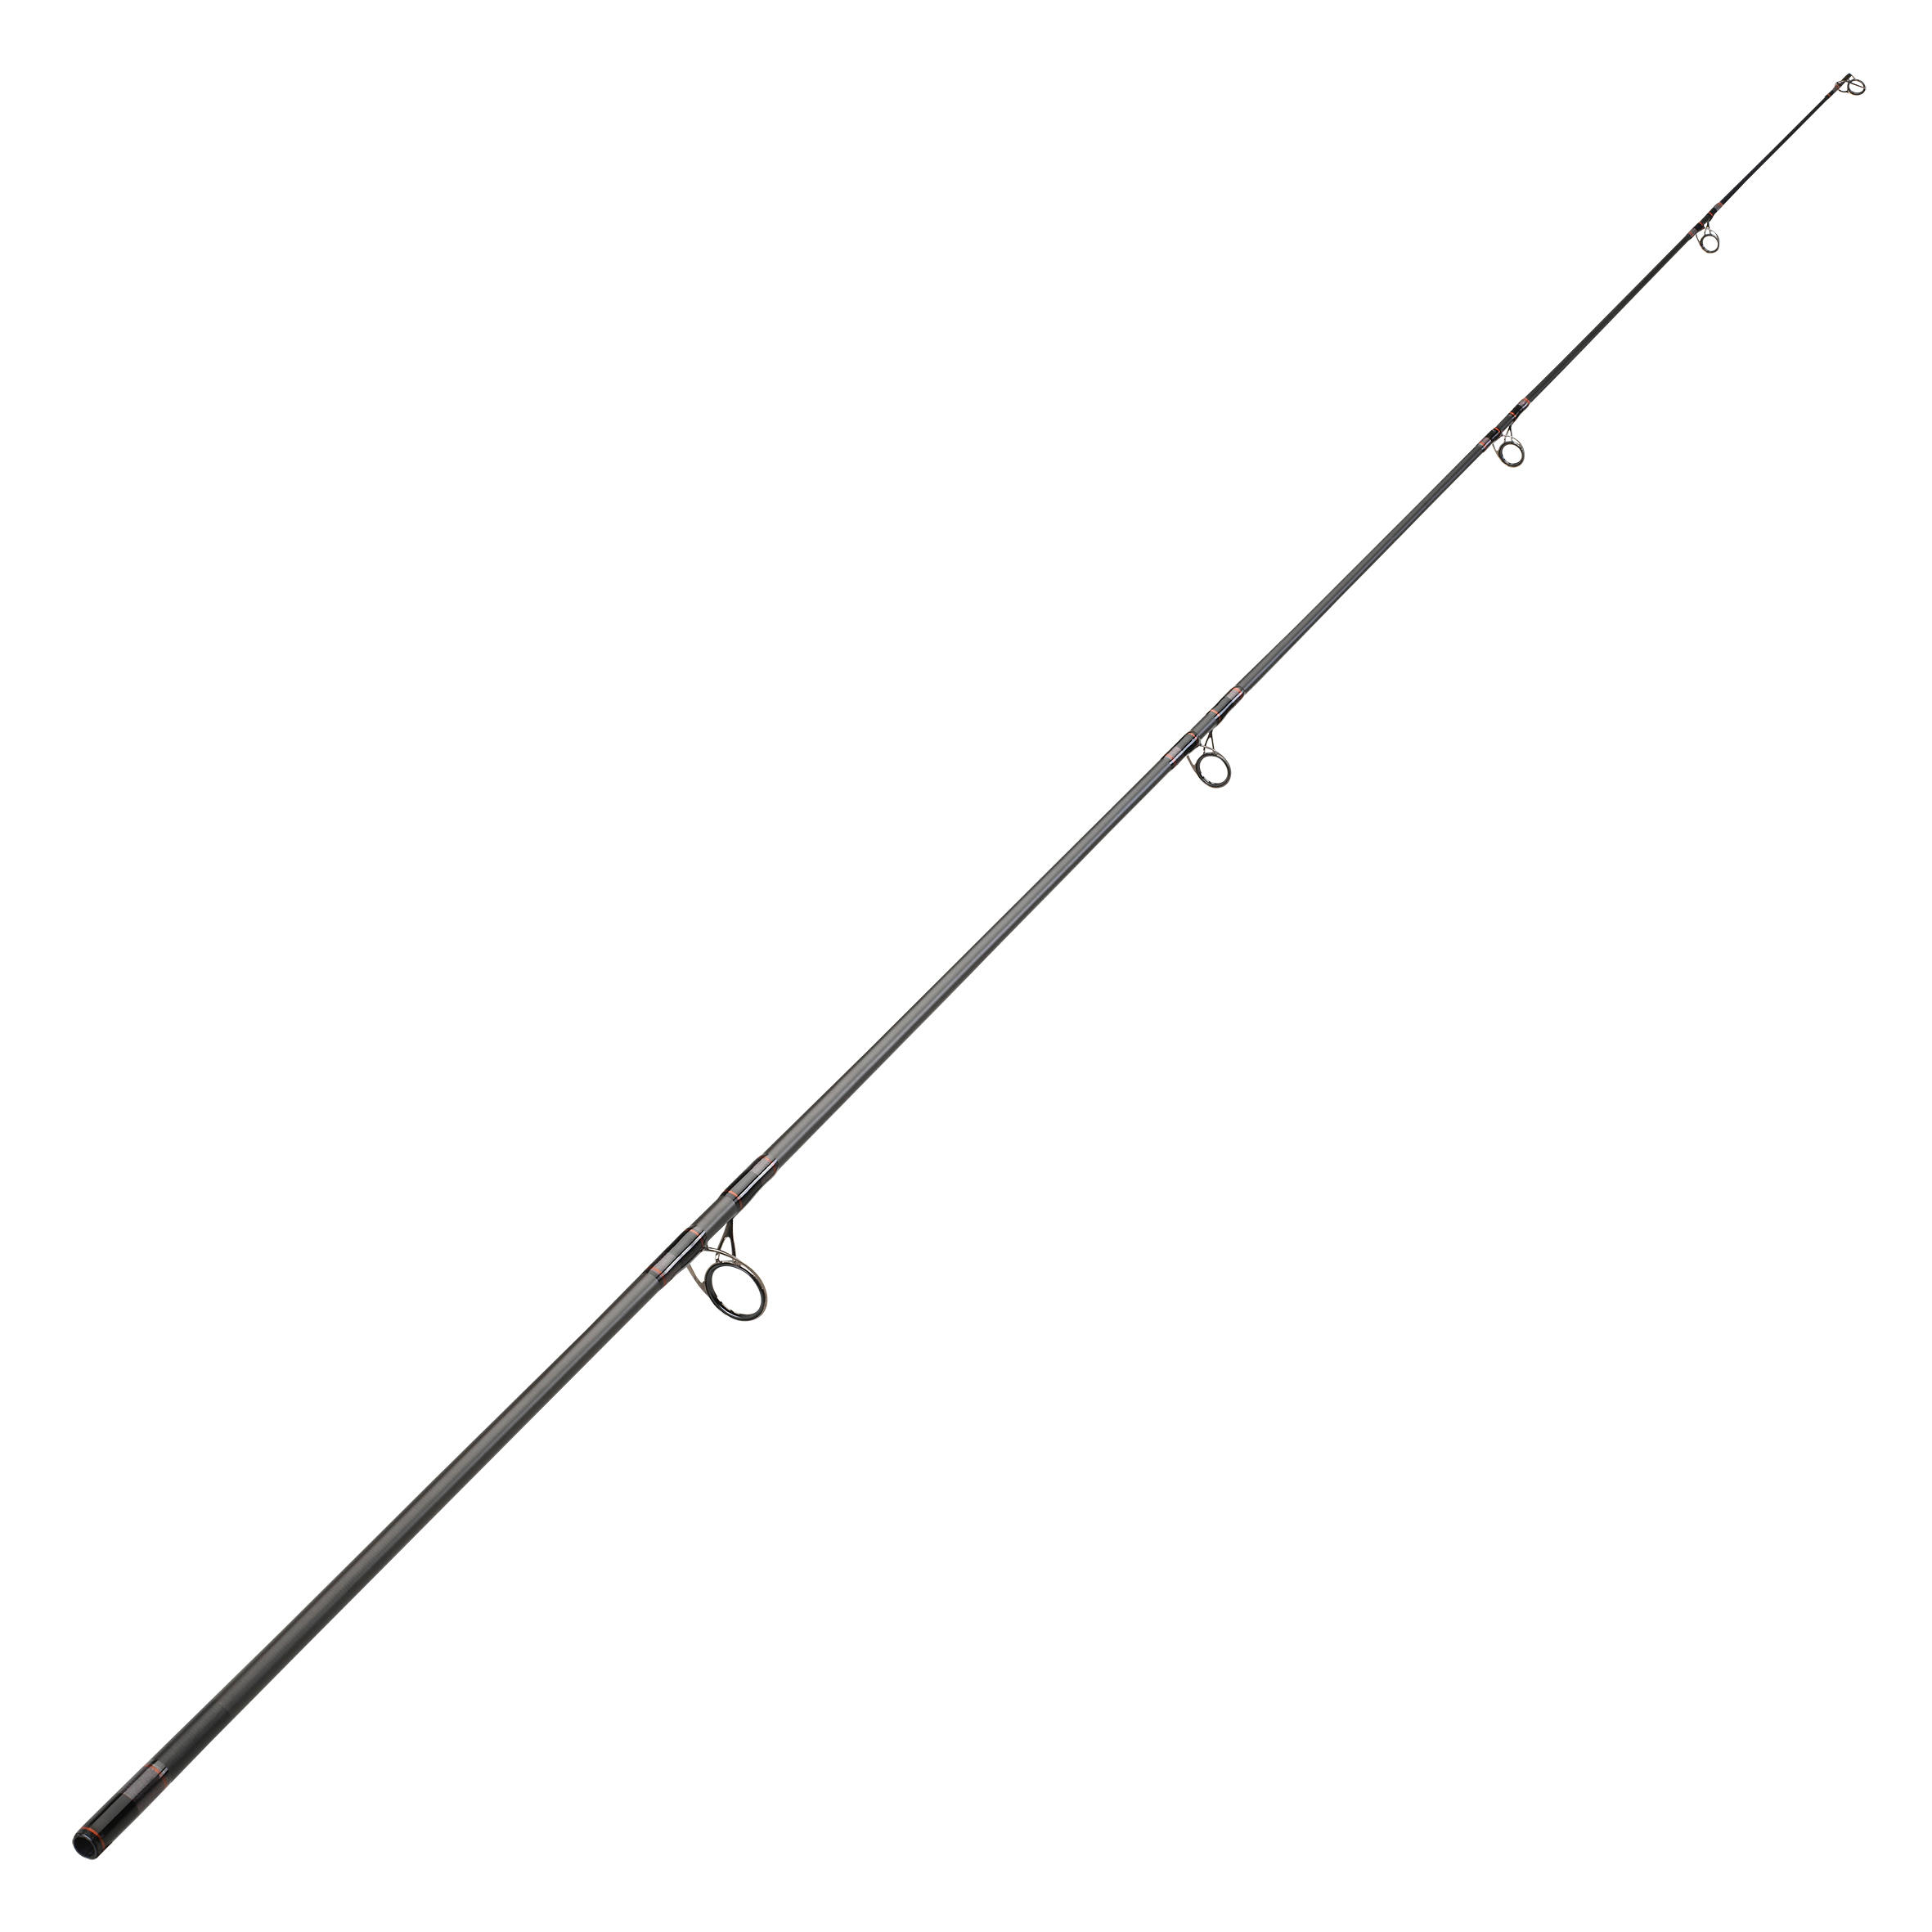 Replacement tip for the Xtrem 9 360cm rod (12 feet) for carp fishing. 1/1